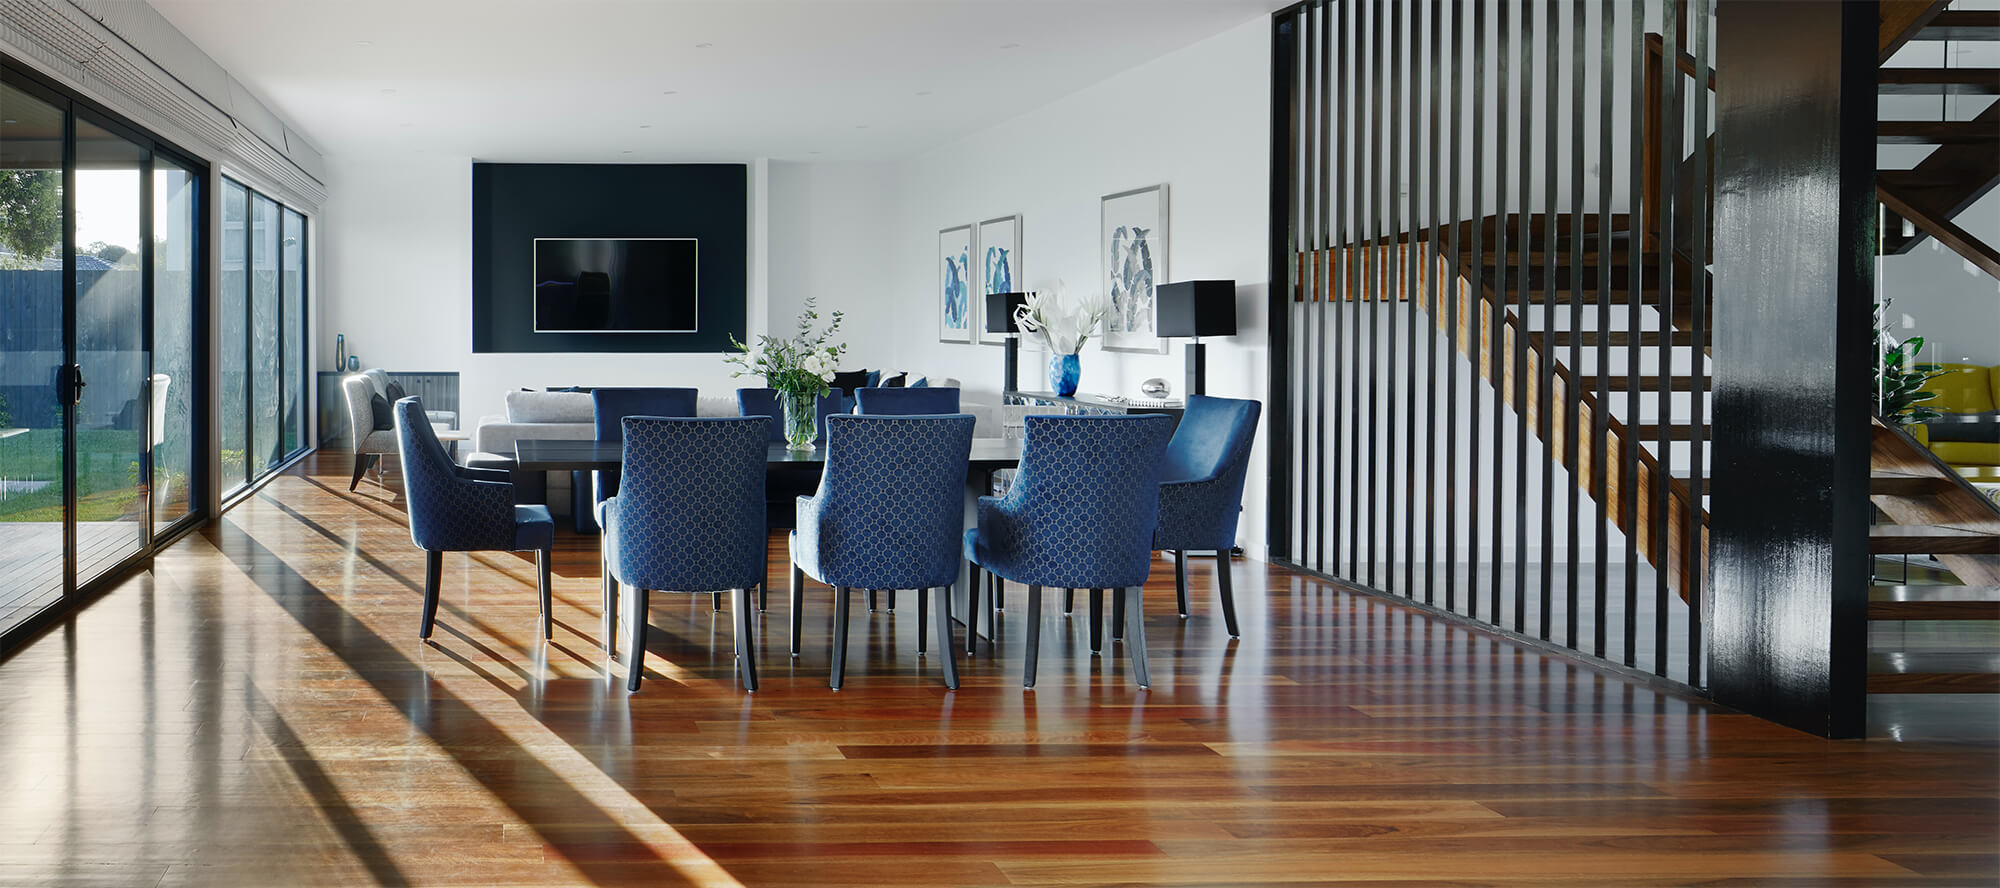 Builder Sunshine Coast - blue and timber dining room